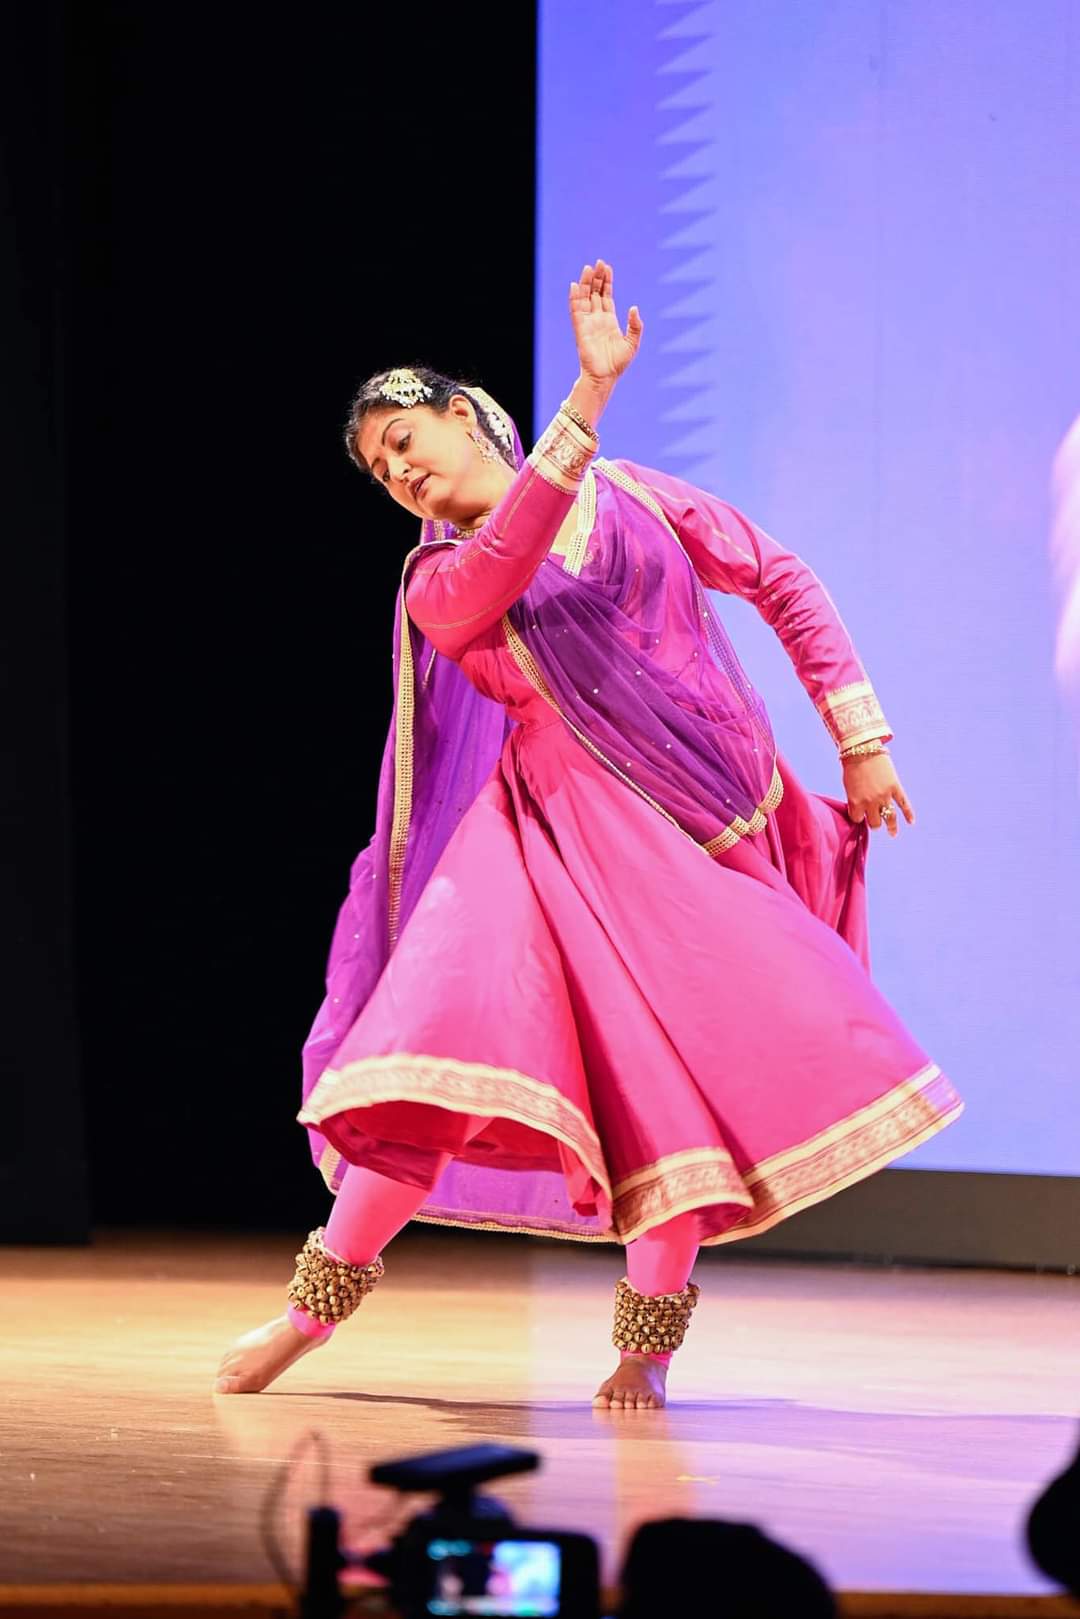 A dancer is presenting classical dance